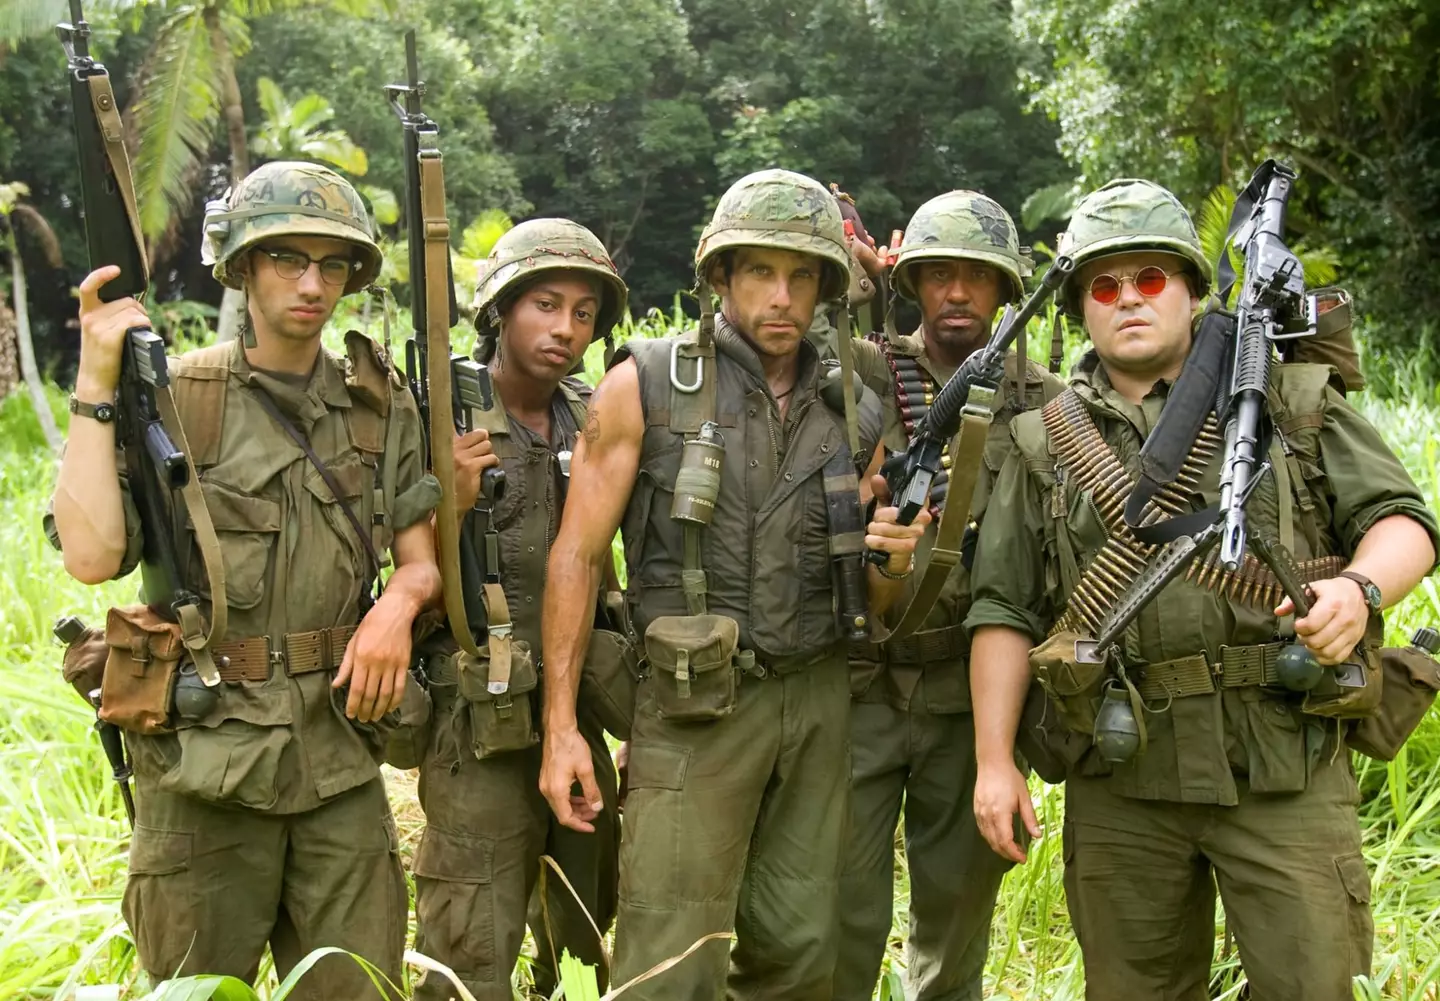 Tropic Thunder is a 2008 satirical action comedy starring the likes of Ben Stiller, Robert Downey Jr., and Jack Black.